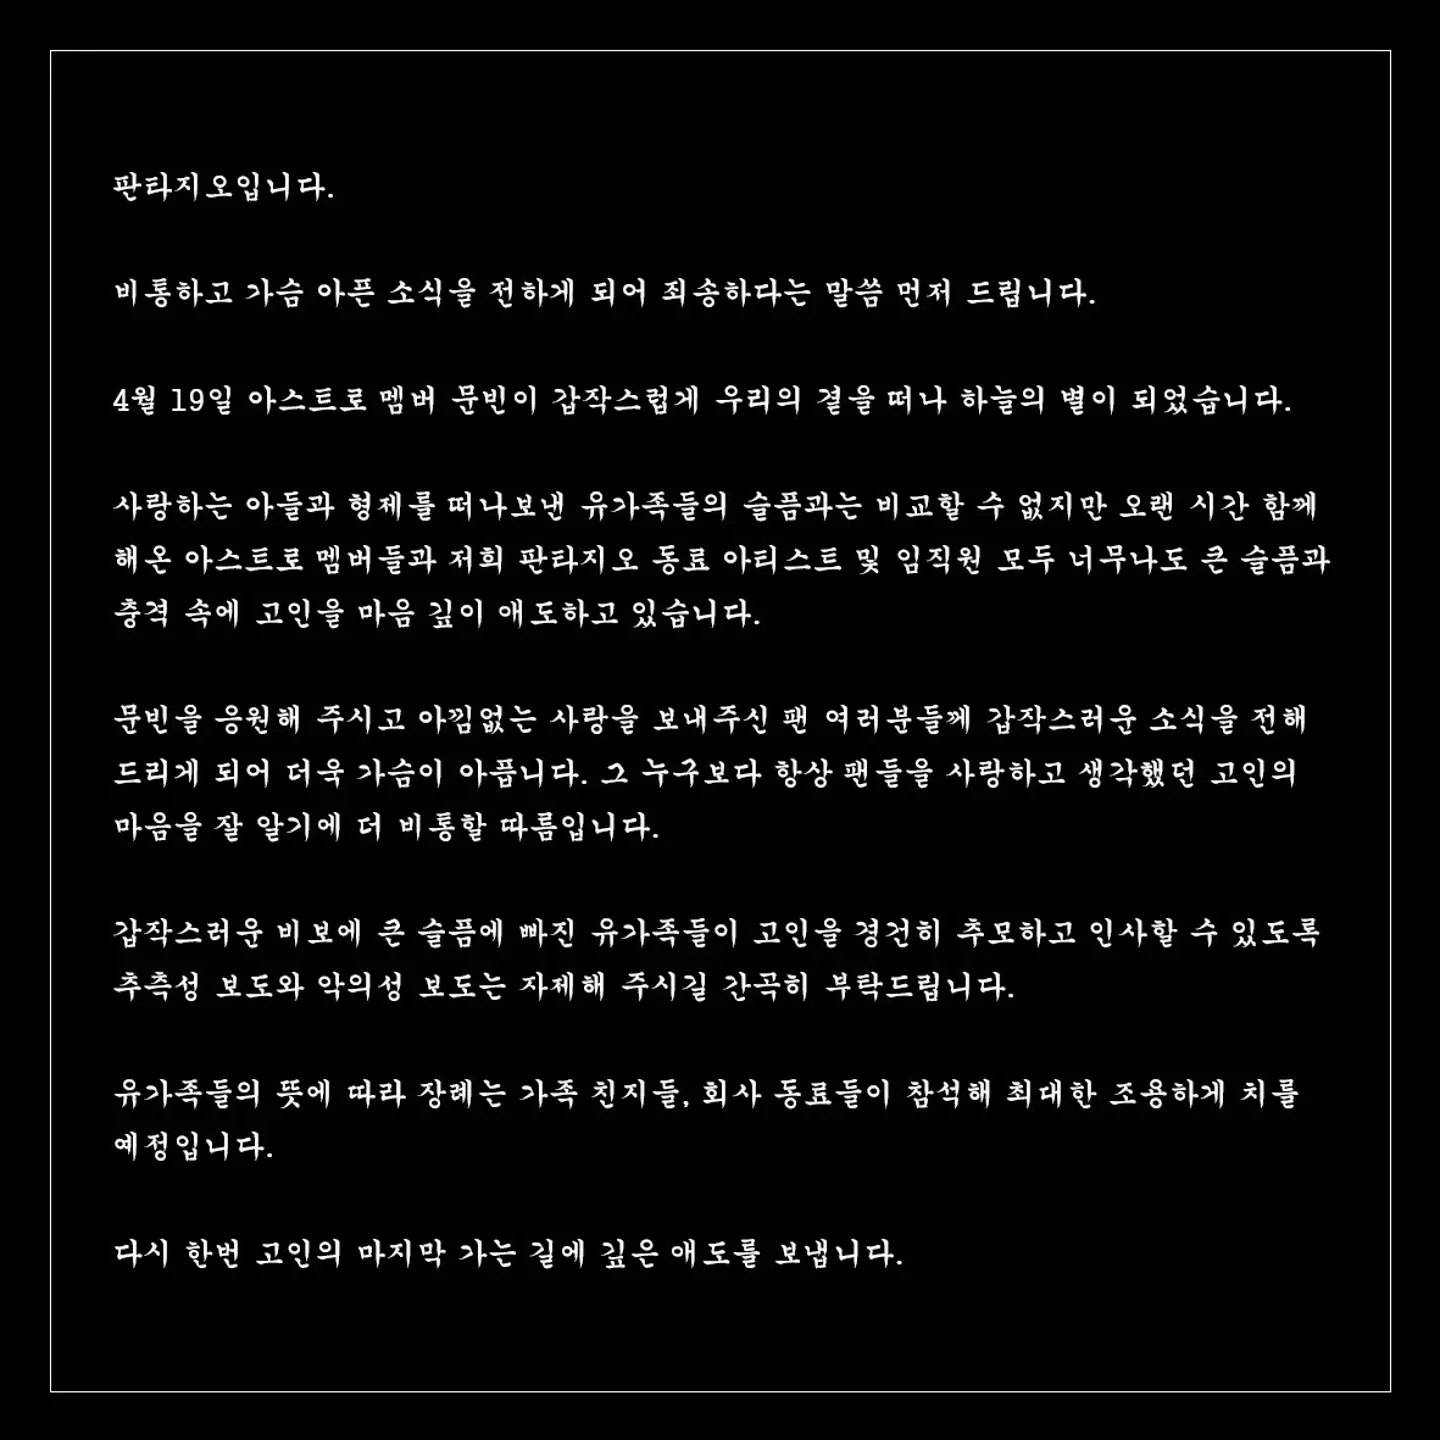 Fantagio released an official statement on the matter to Twitter.